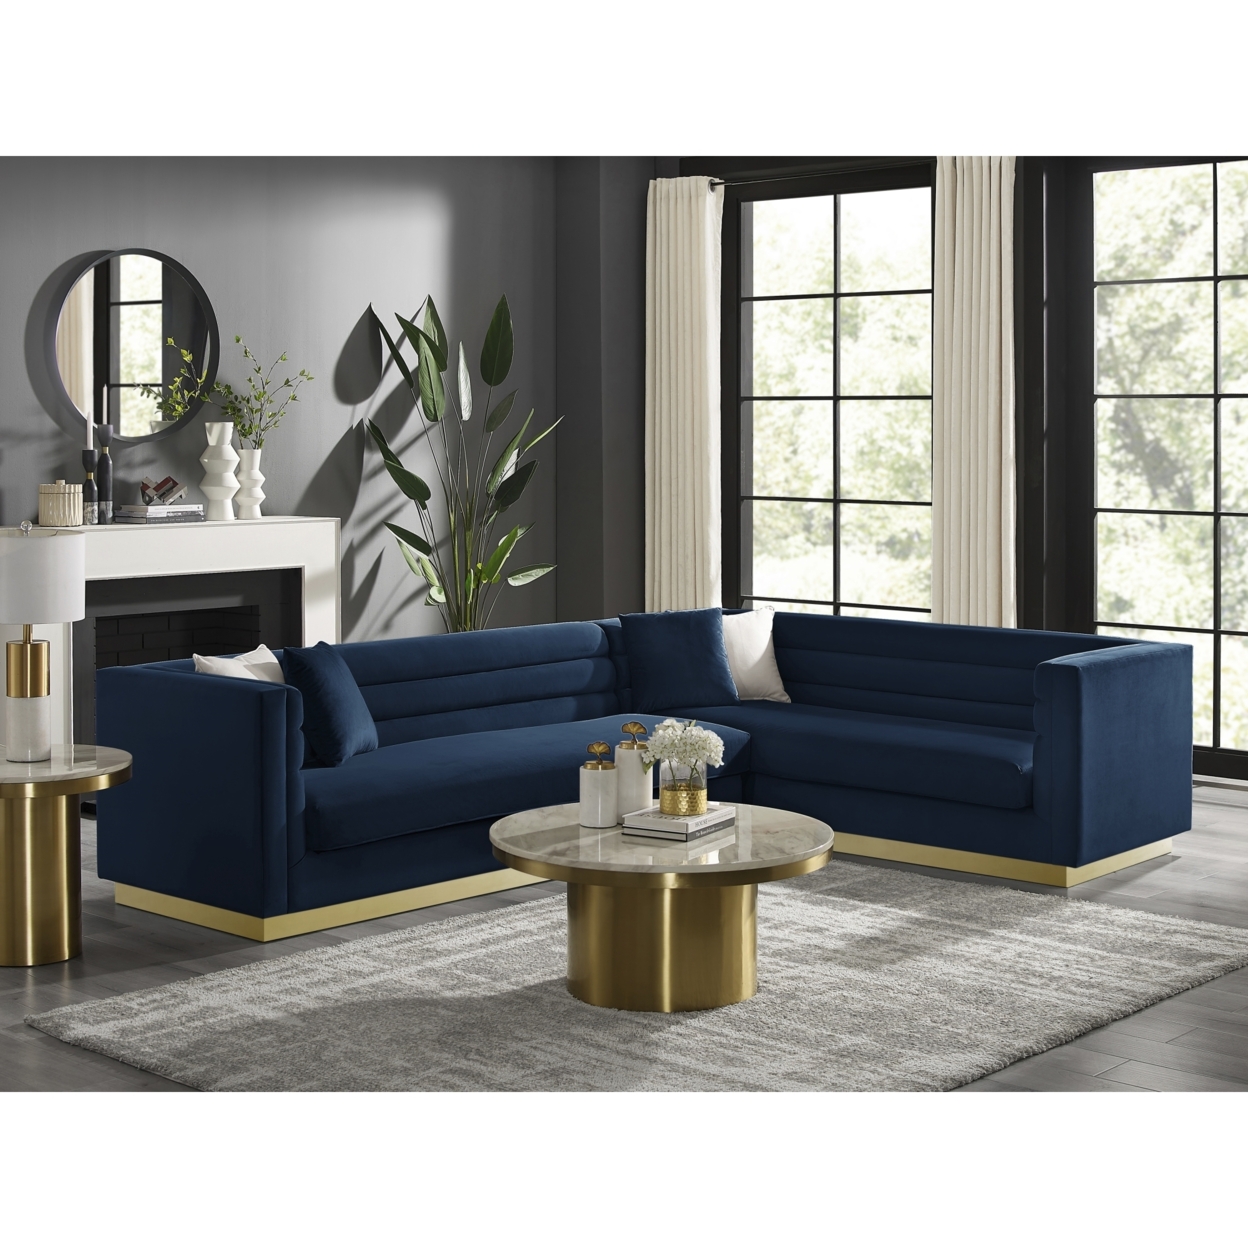 Aja Sofa-Upholstered-Metal Base, Sectional-Square Arms-Horizontal Channel Tufting - navy - navy blue